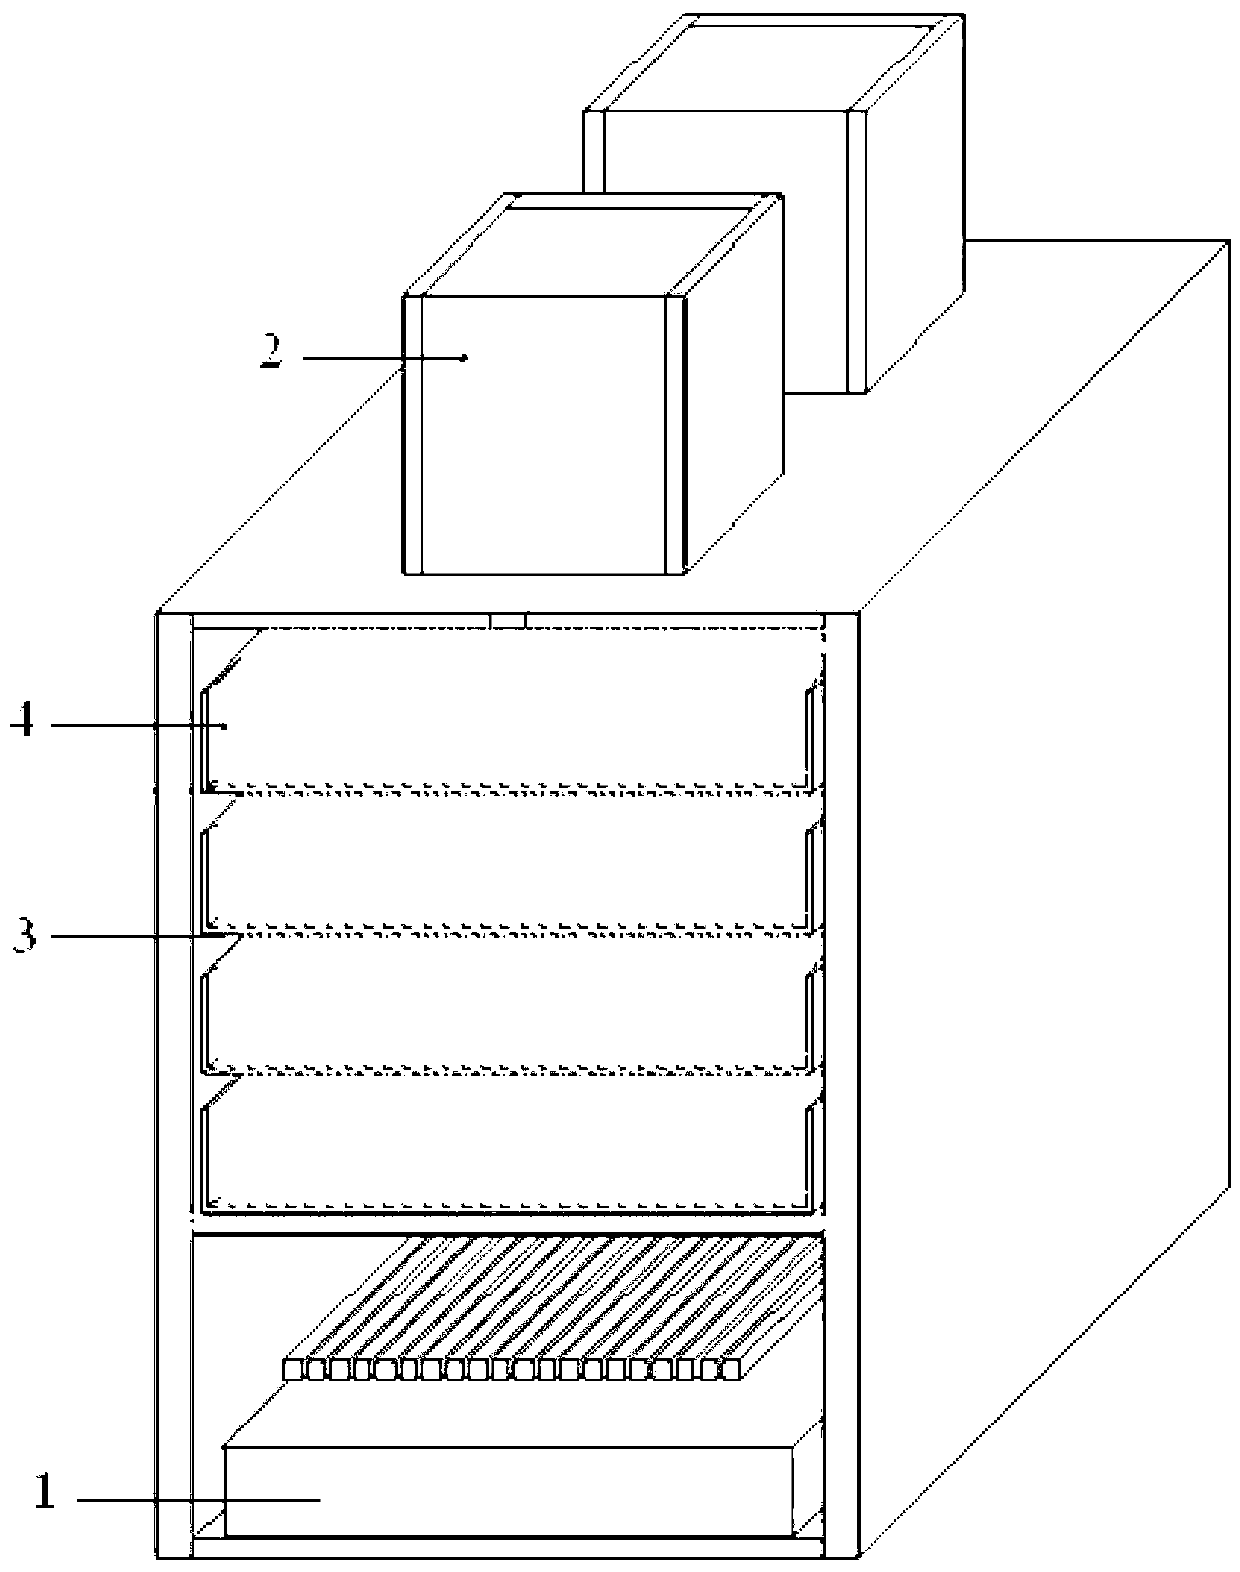 Method for preparing uniform heat treatment wood by stacking